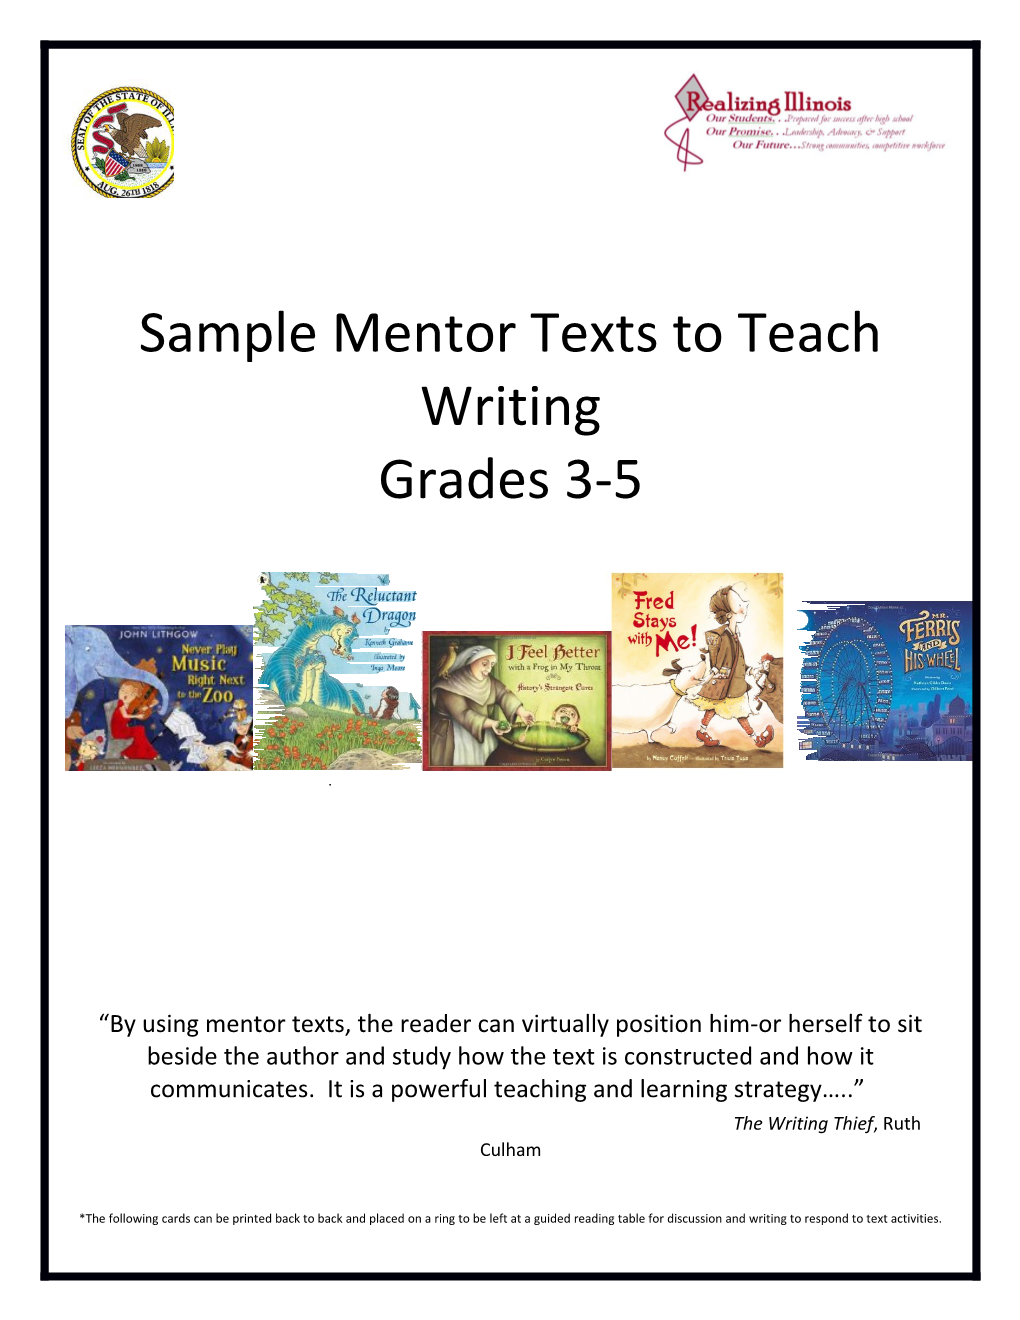 Samplementor Texts to Teach Writing